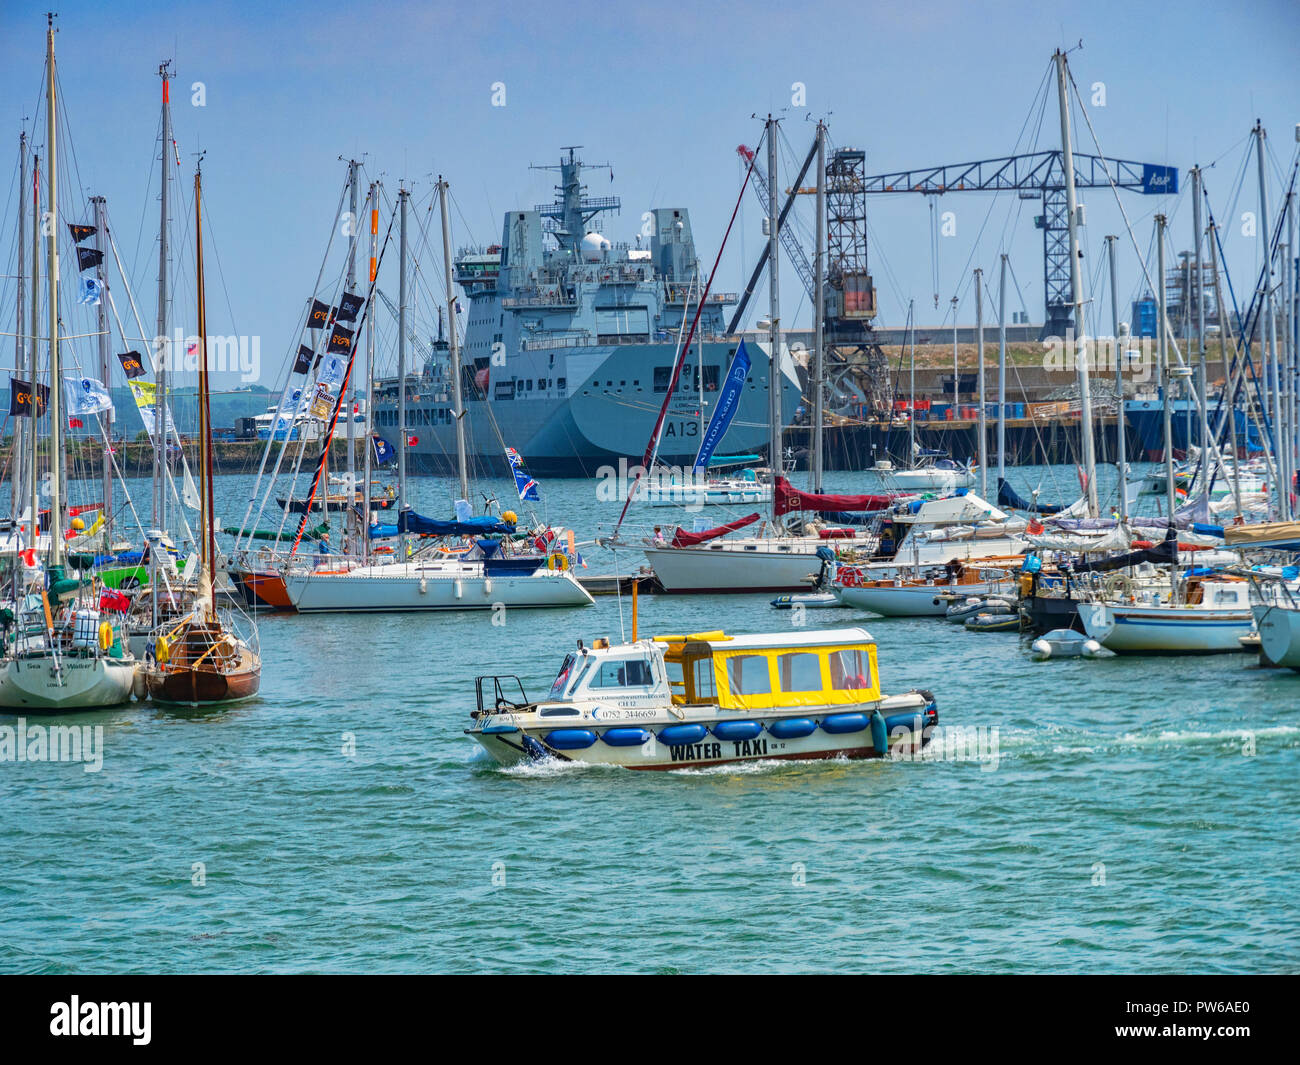 12 June 2018: Falmouth, Cornwall, UK - Water Taxi crossing Falmouth harbour, with a background of boats and a naval vessel in dock. Stock Photo